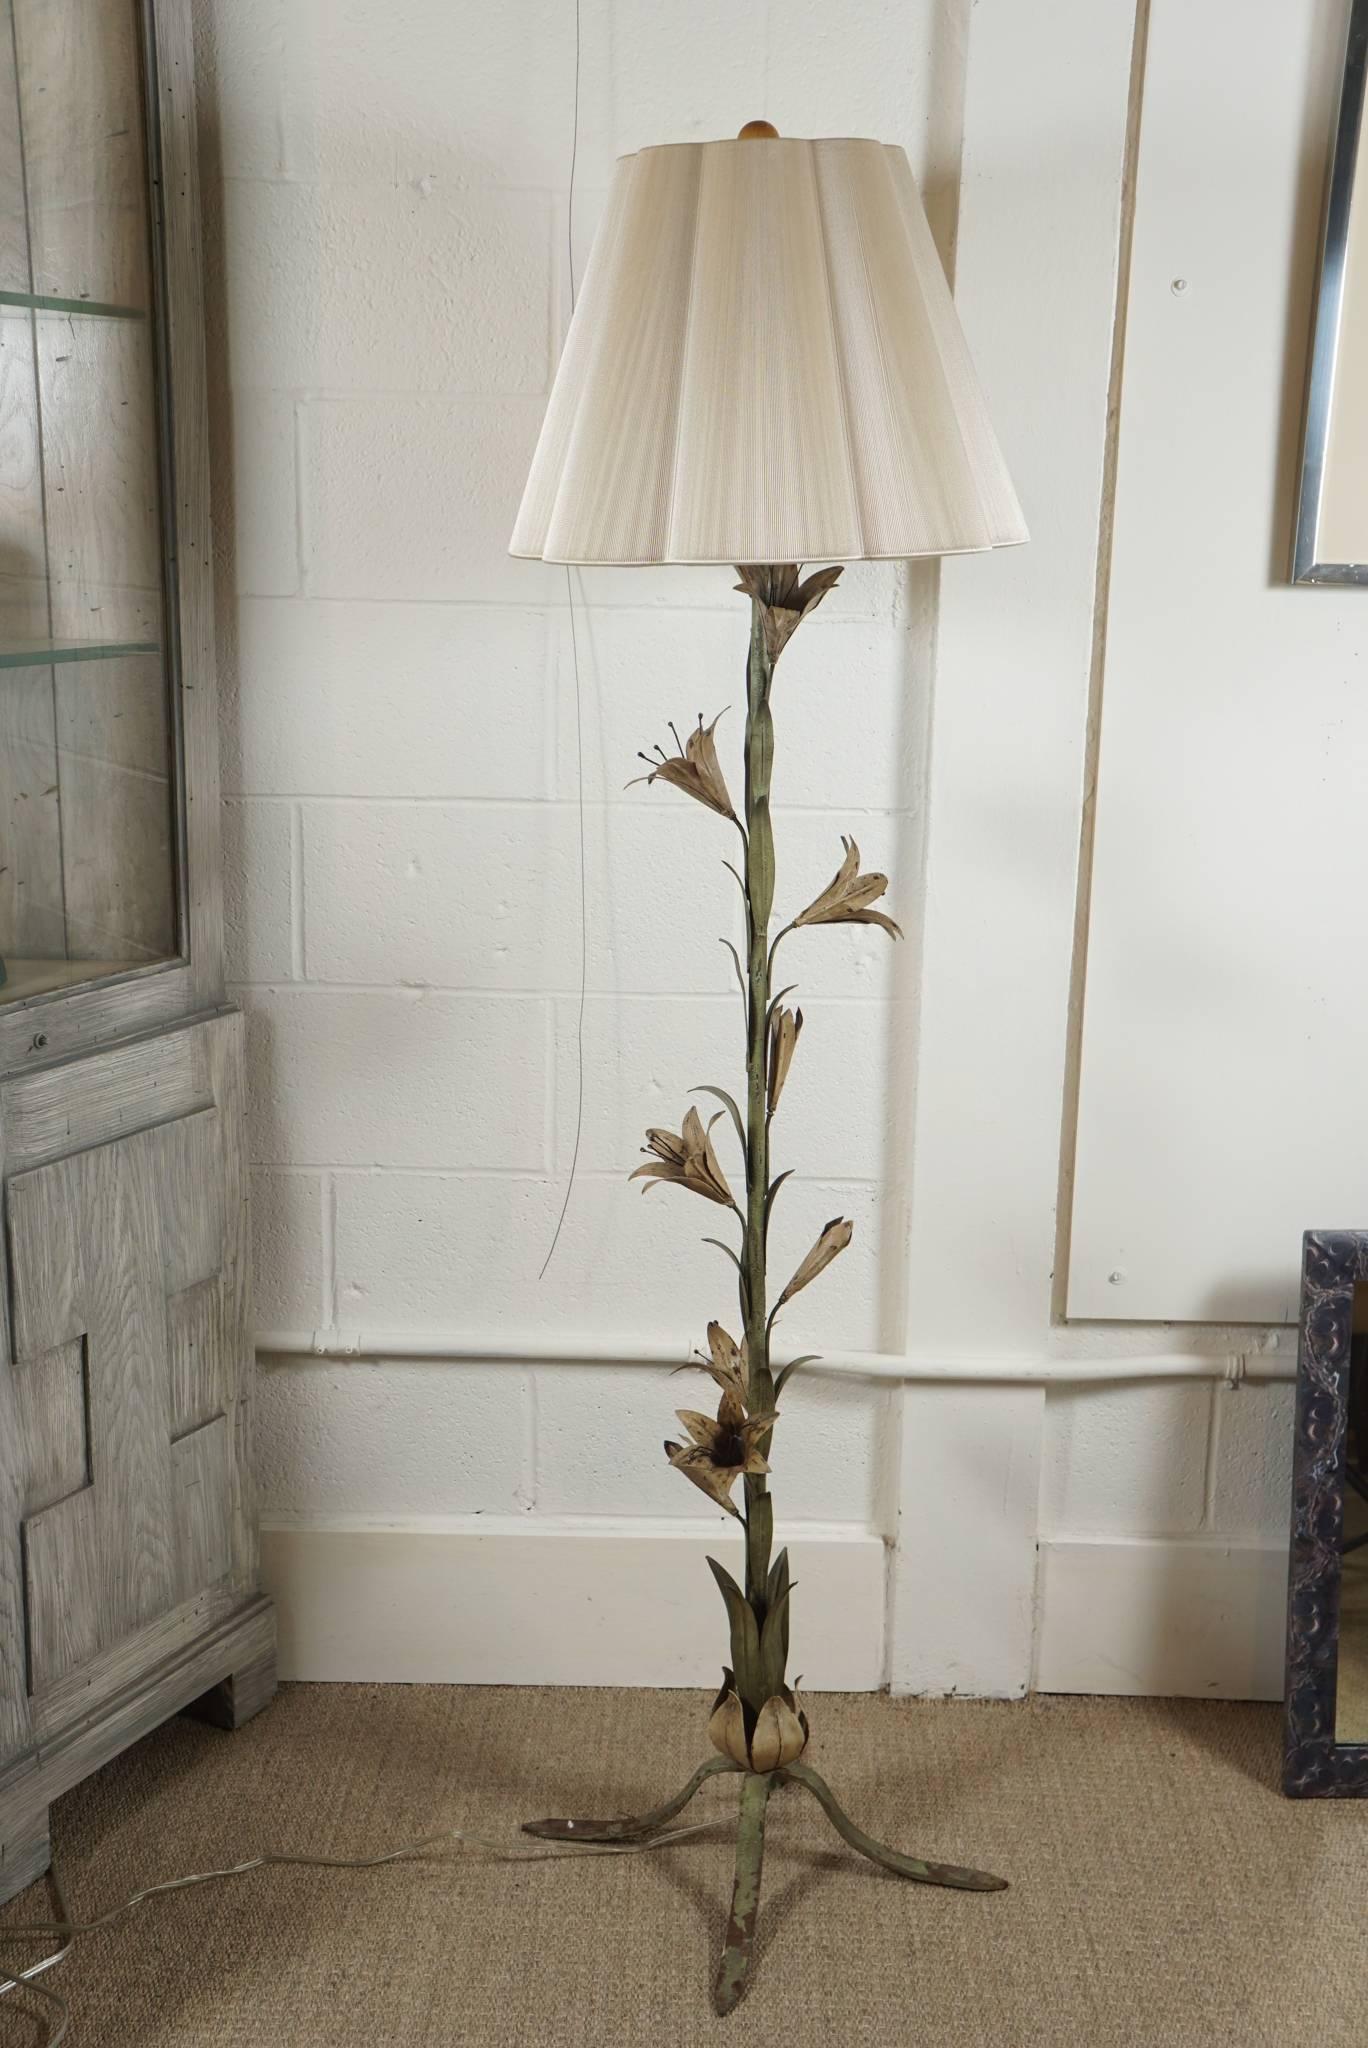 Here is a unique and elegant tole flower and leaf motif standing lamp. The muted colors are understated and the patina has a nice worn surface. The lamp is available with or without the string shade which enhances the appeal of this lamp.